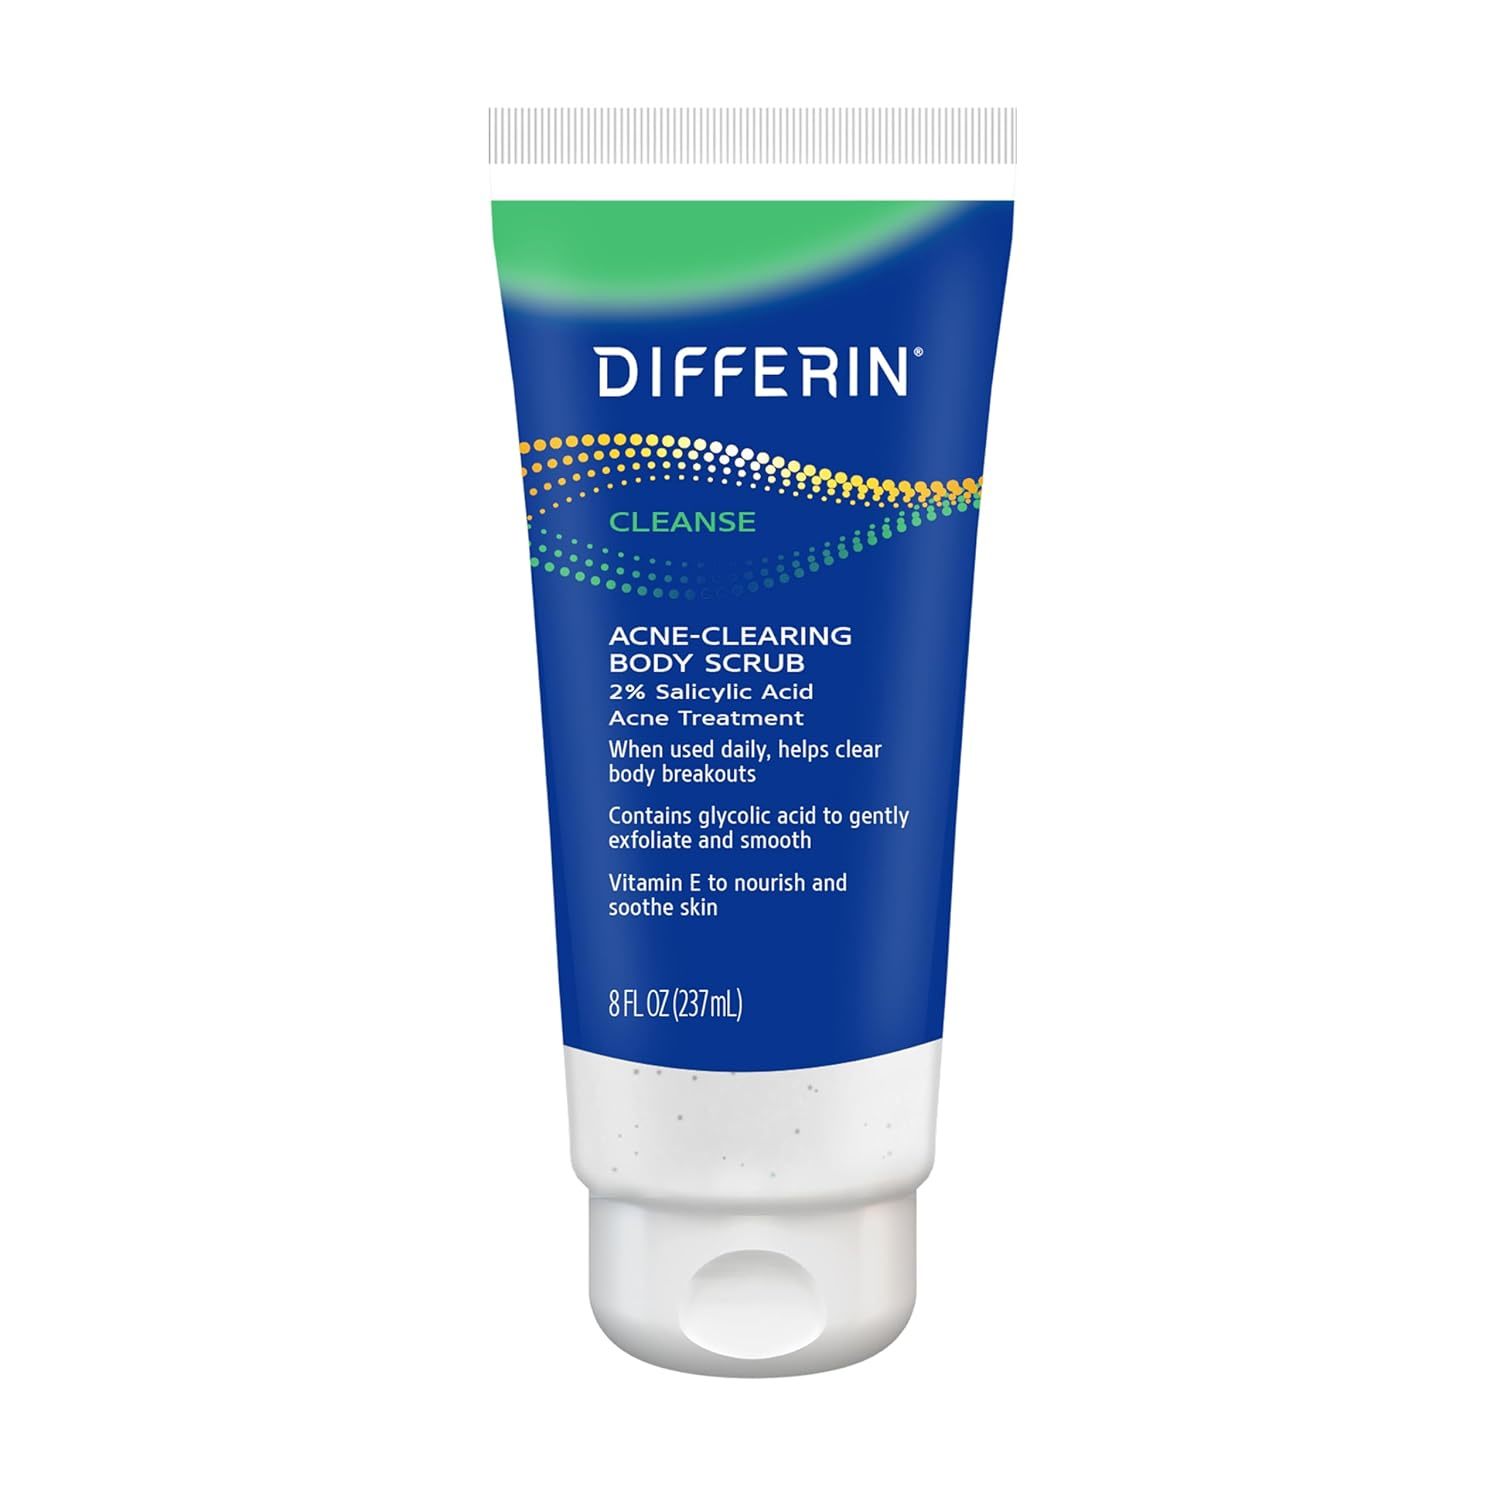 Differin Body Scrub with Salicylic Acid Acne Clearing Improves Tone and Texture  - $18.99